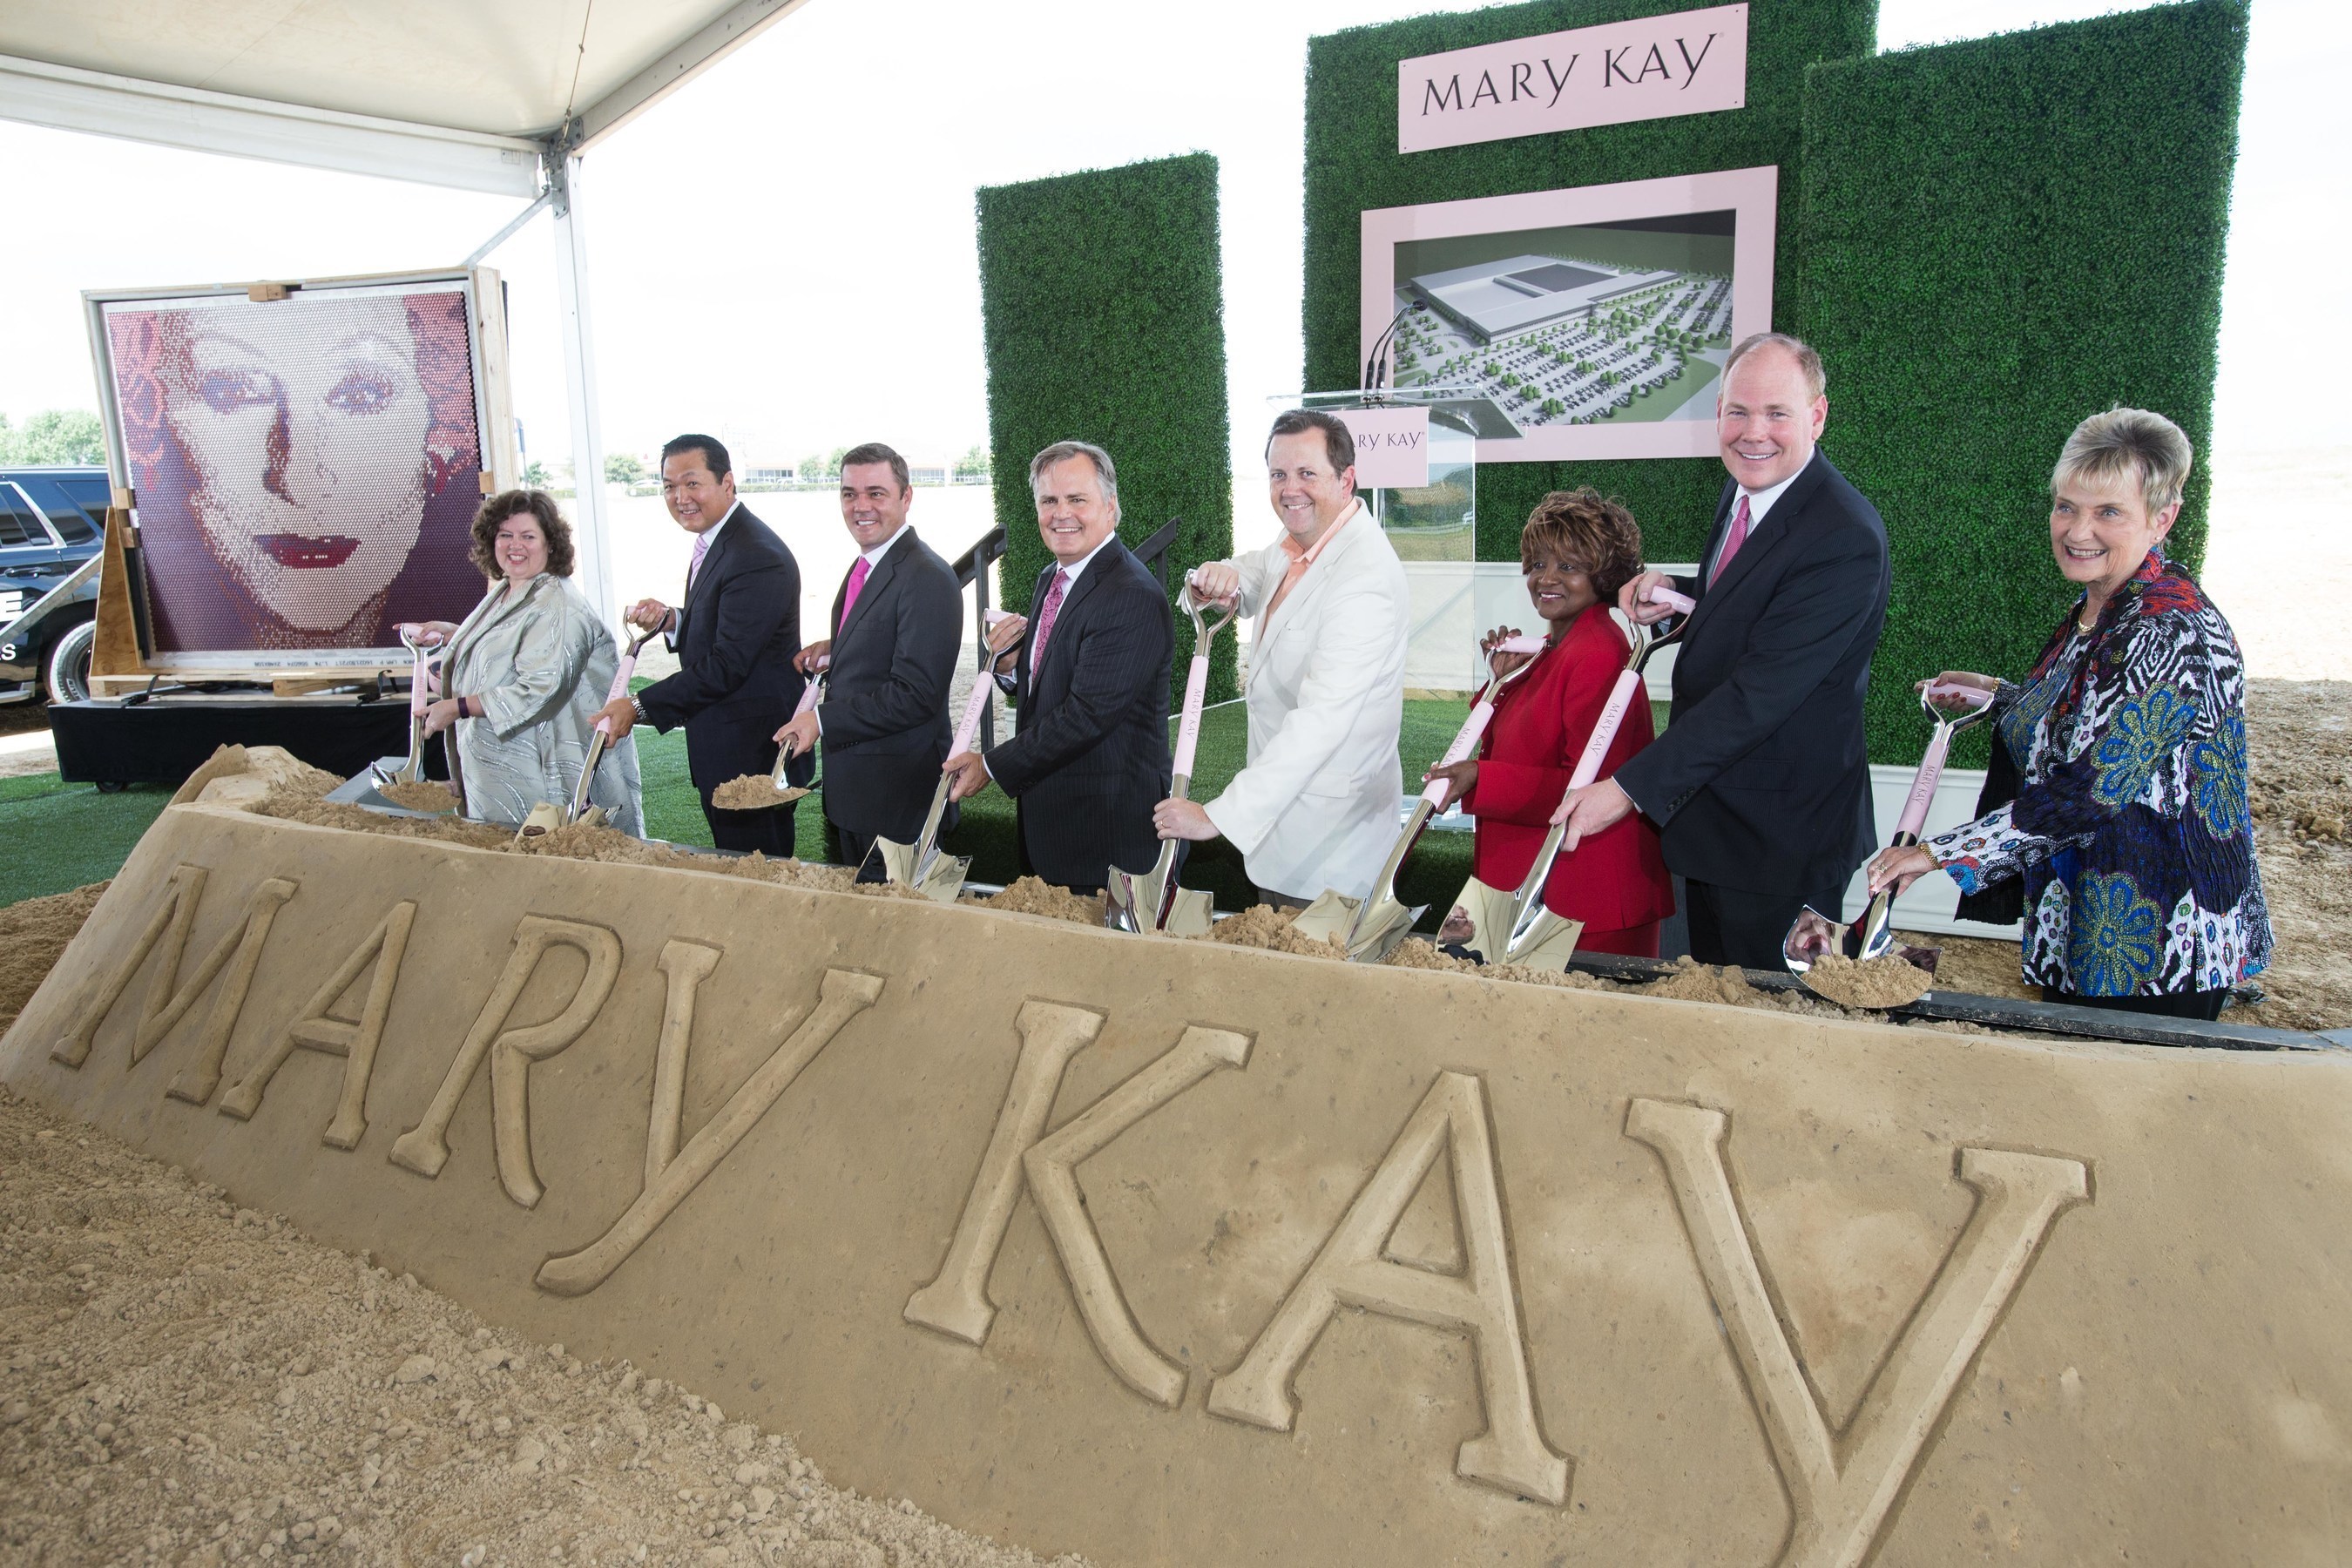 Exactly 53 years to the day after Mary Kay Ash launched her dream company from a small Dallas storefront, Mary Kay Inc. is breaking ground on a new 480,000 square foot U.S.-based global manufacturing and research and development facility located on a 26.2 acre plot of land in Lewisville, Texas. As the global cosmetics company approaches the status of a top five beauty brand, the new $125 million building will support the company's future needs in producing skin care, color cosmetics and fragrances for more than 3.5 million Mary Kay Independent Beauty Consultants in more than 35 countries.